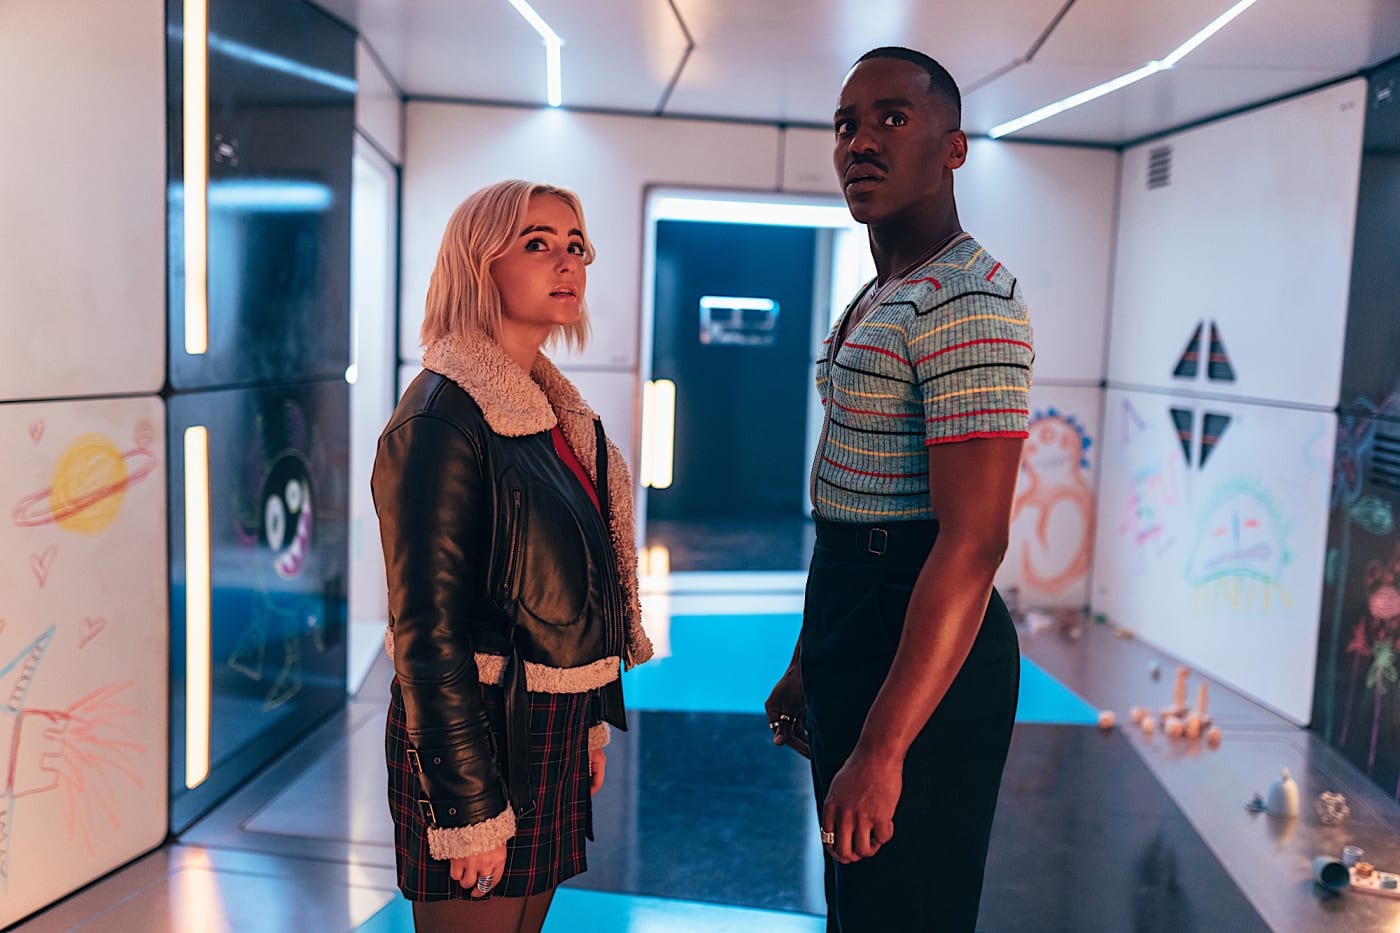 Doctor Who Space Babies review: Bet you didn’t expect that